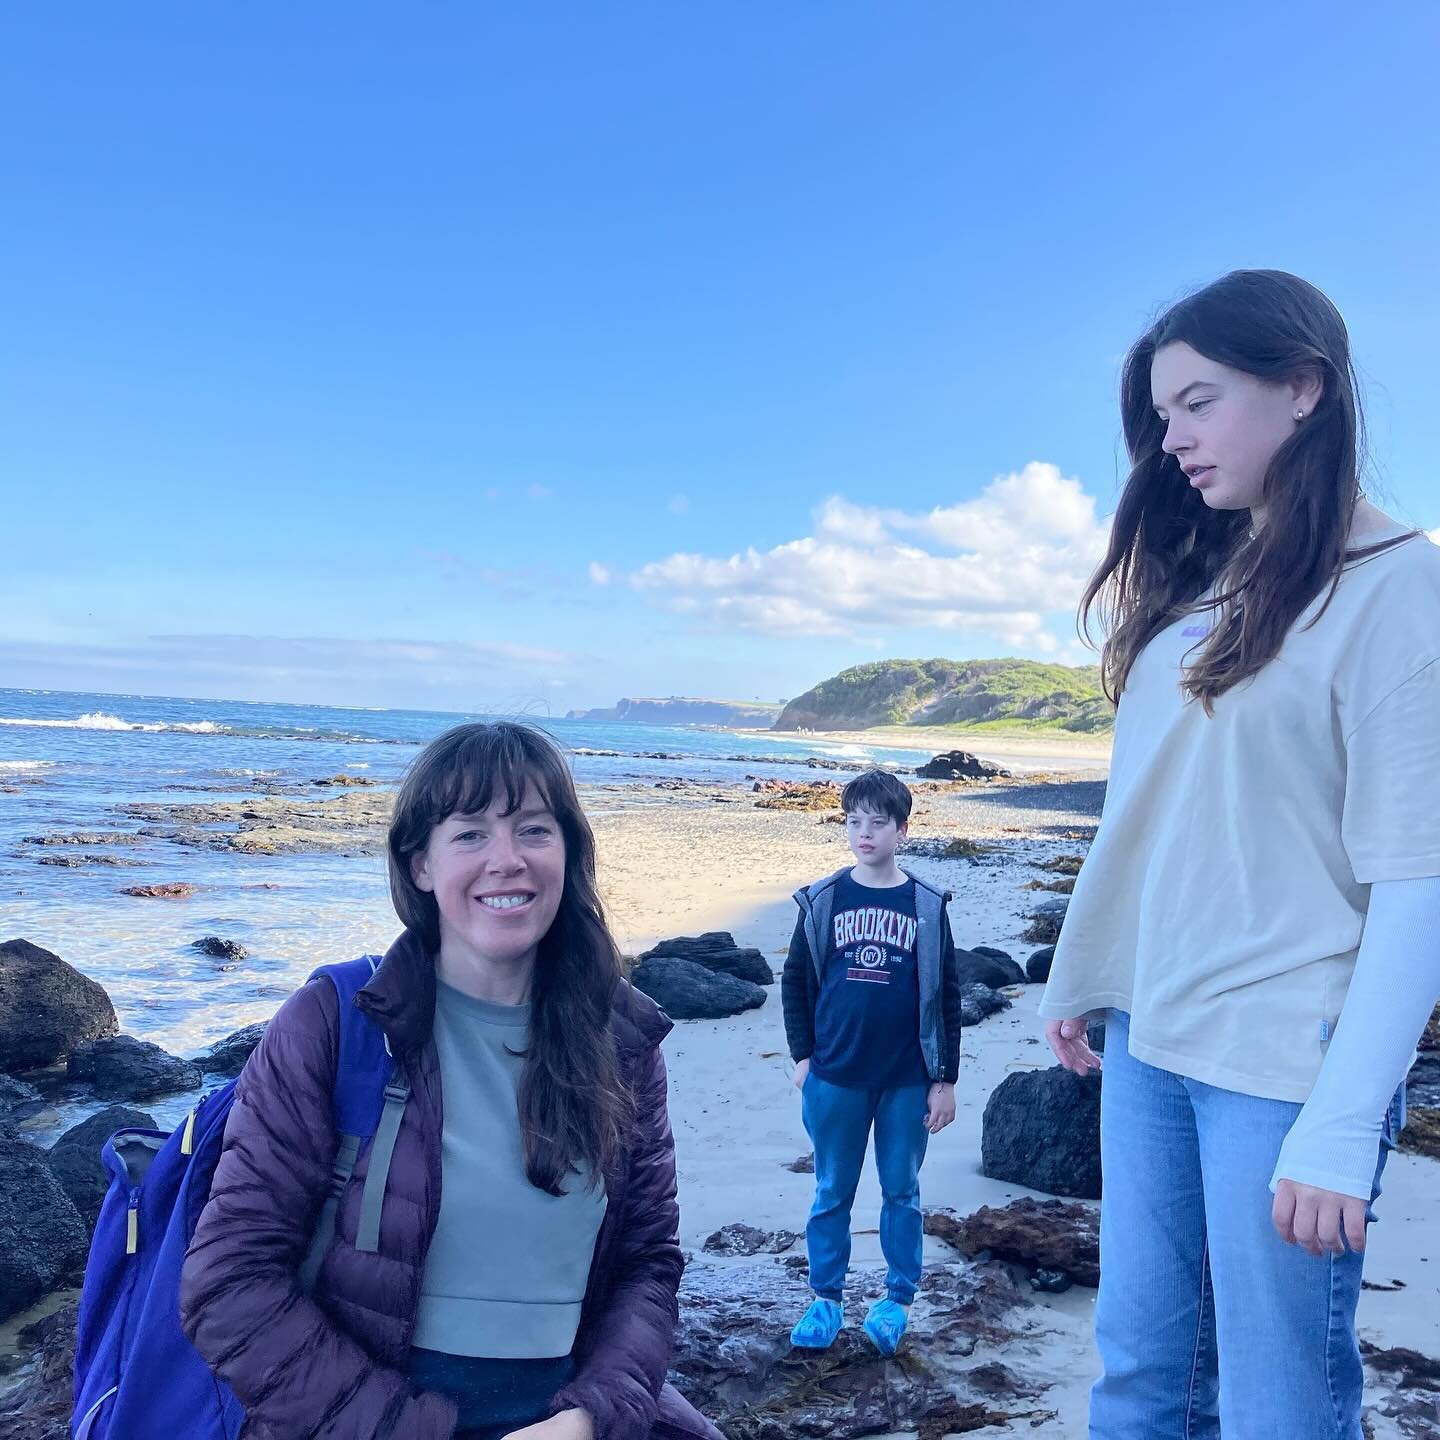 I had such a blissful Mother&rsquo;s Day yesterday at Flinders that I had no time or desire to post on insta! A day late but a great day of snorkelling, walking and picnics at Mushroom Reef Flinders, nature at its finest. Check out the cute little Pl